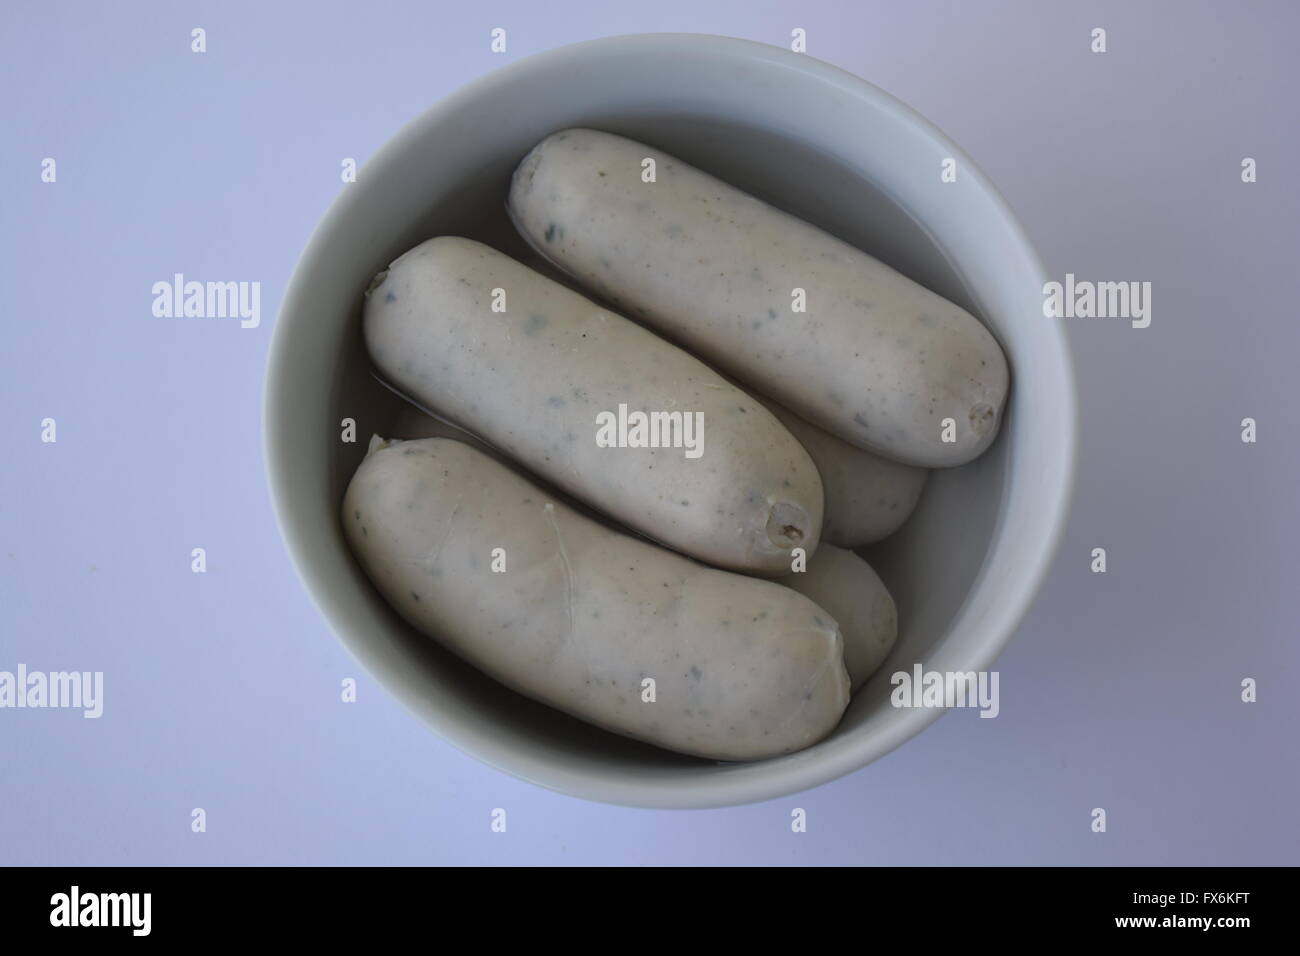 Weisswürste in a dish Stock Photo